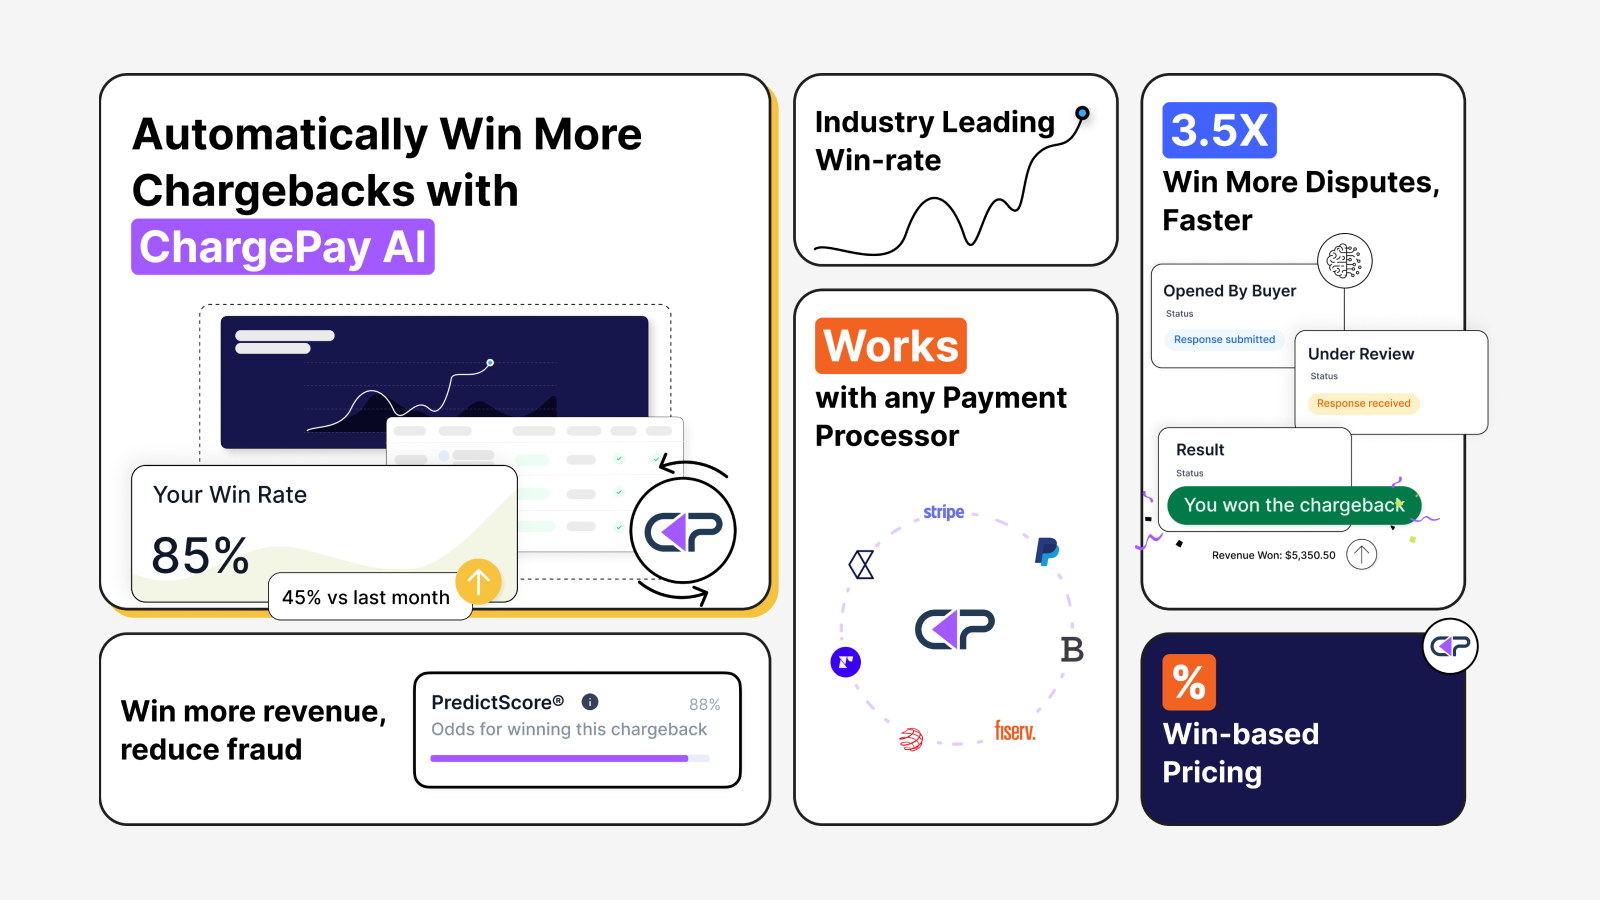 Fight and Win Every Chargeback with AI powered Chargeback App